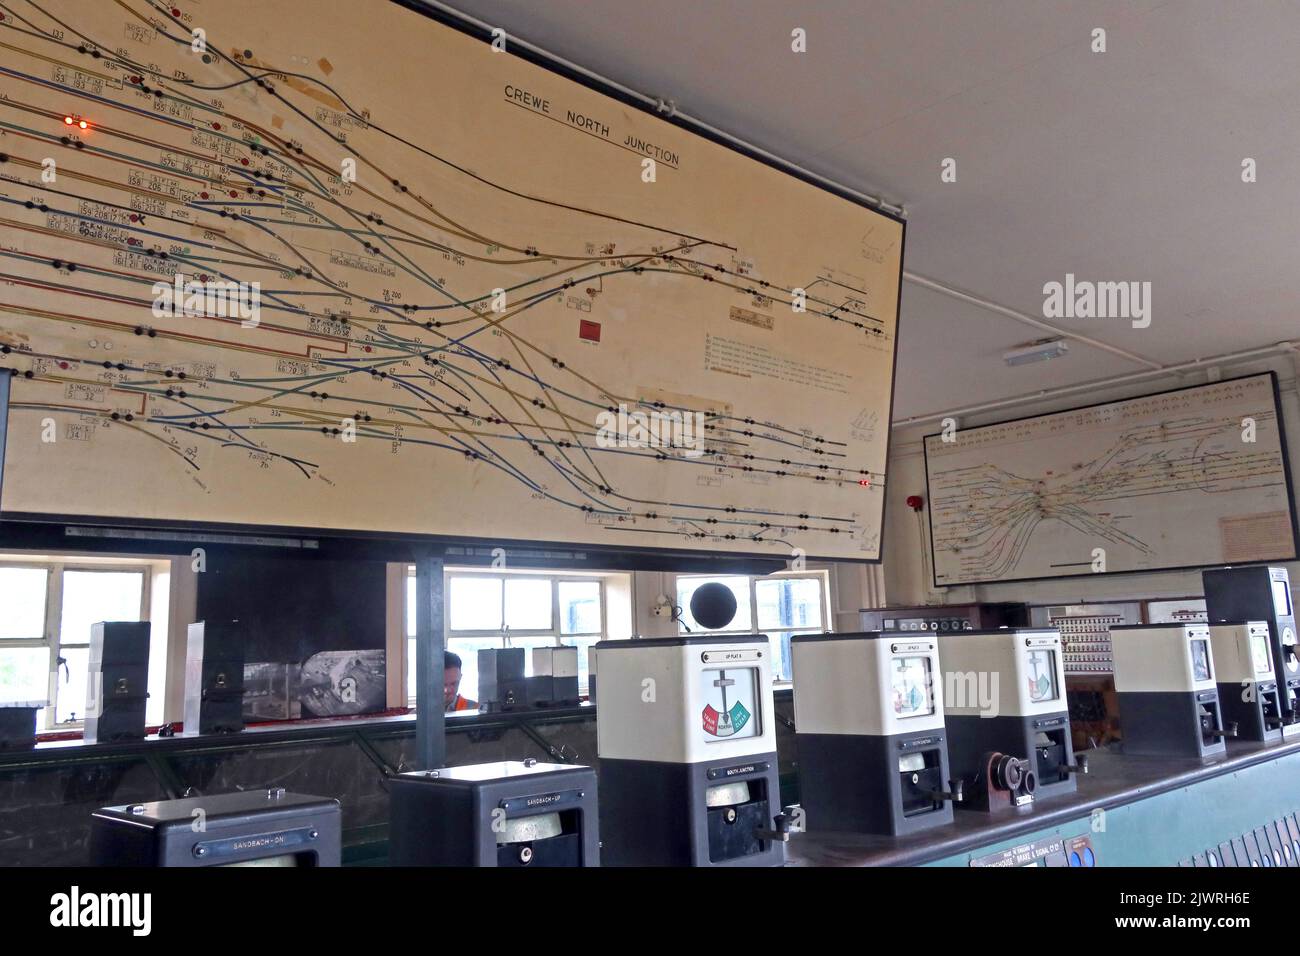 Track layout at Crewe North Junction signal box, with Westinghouse All Electric Style 'L' lever frame, Cheshire, England, UK ,CW1 2DB Stock Photo